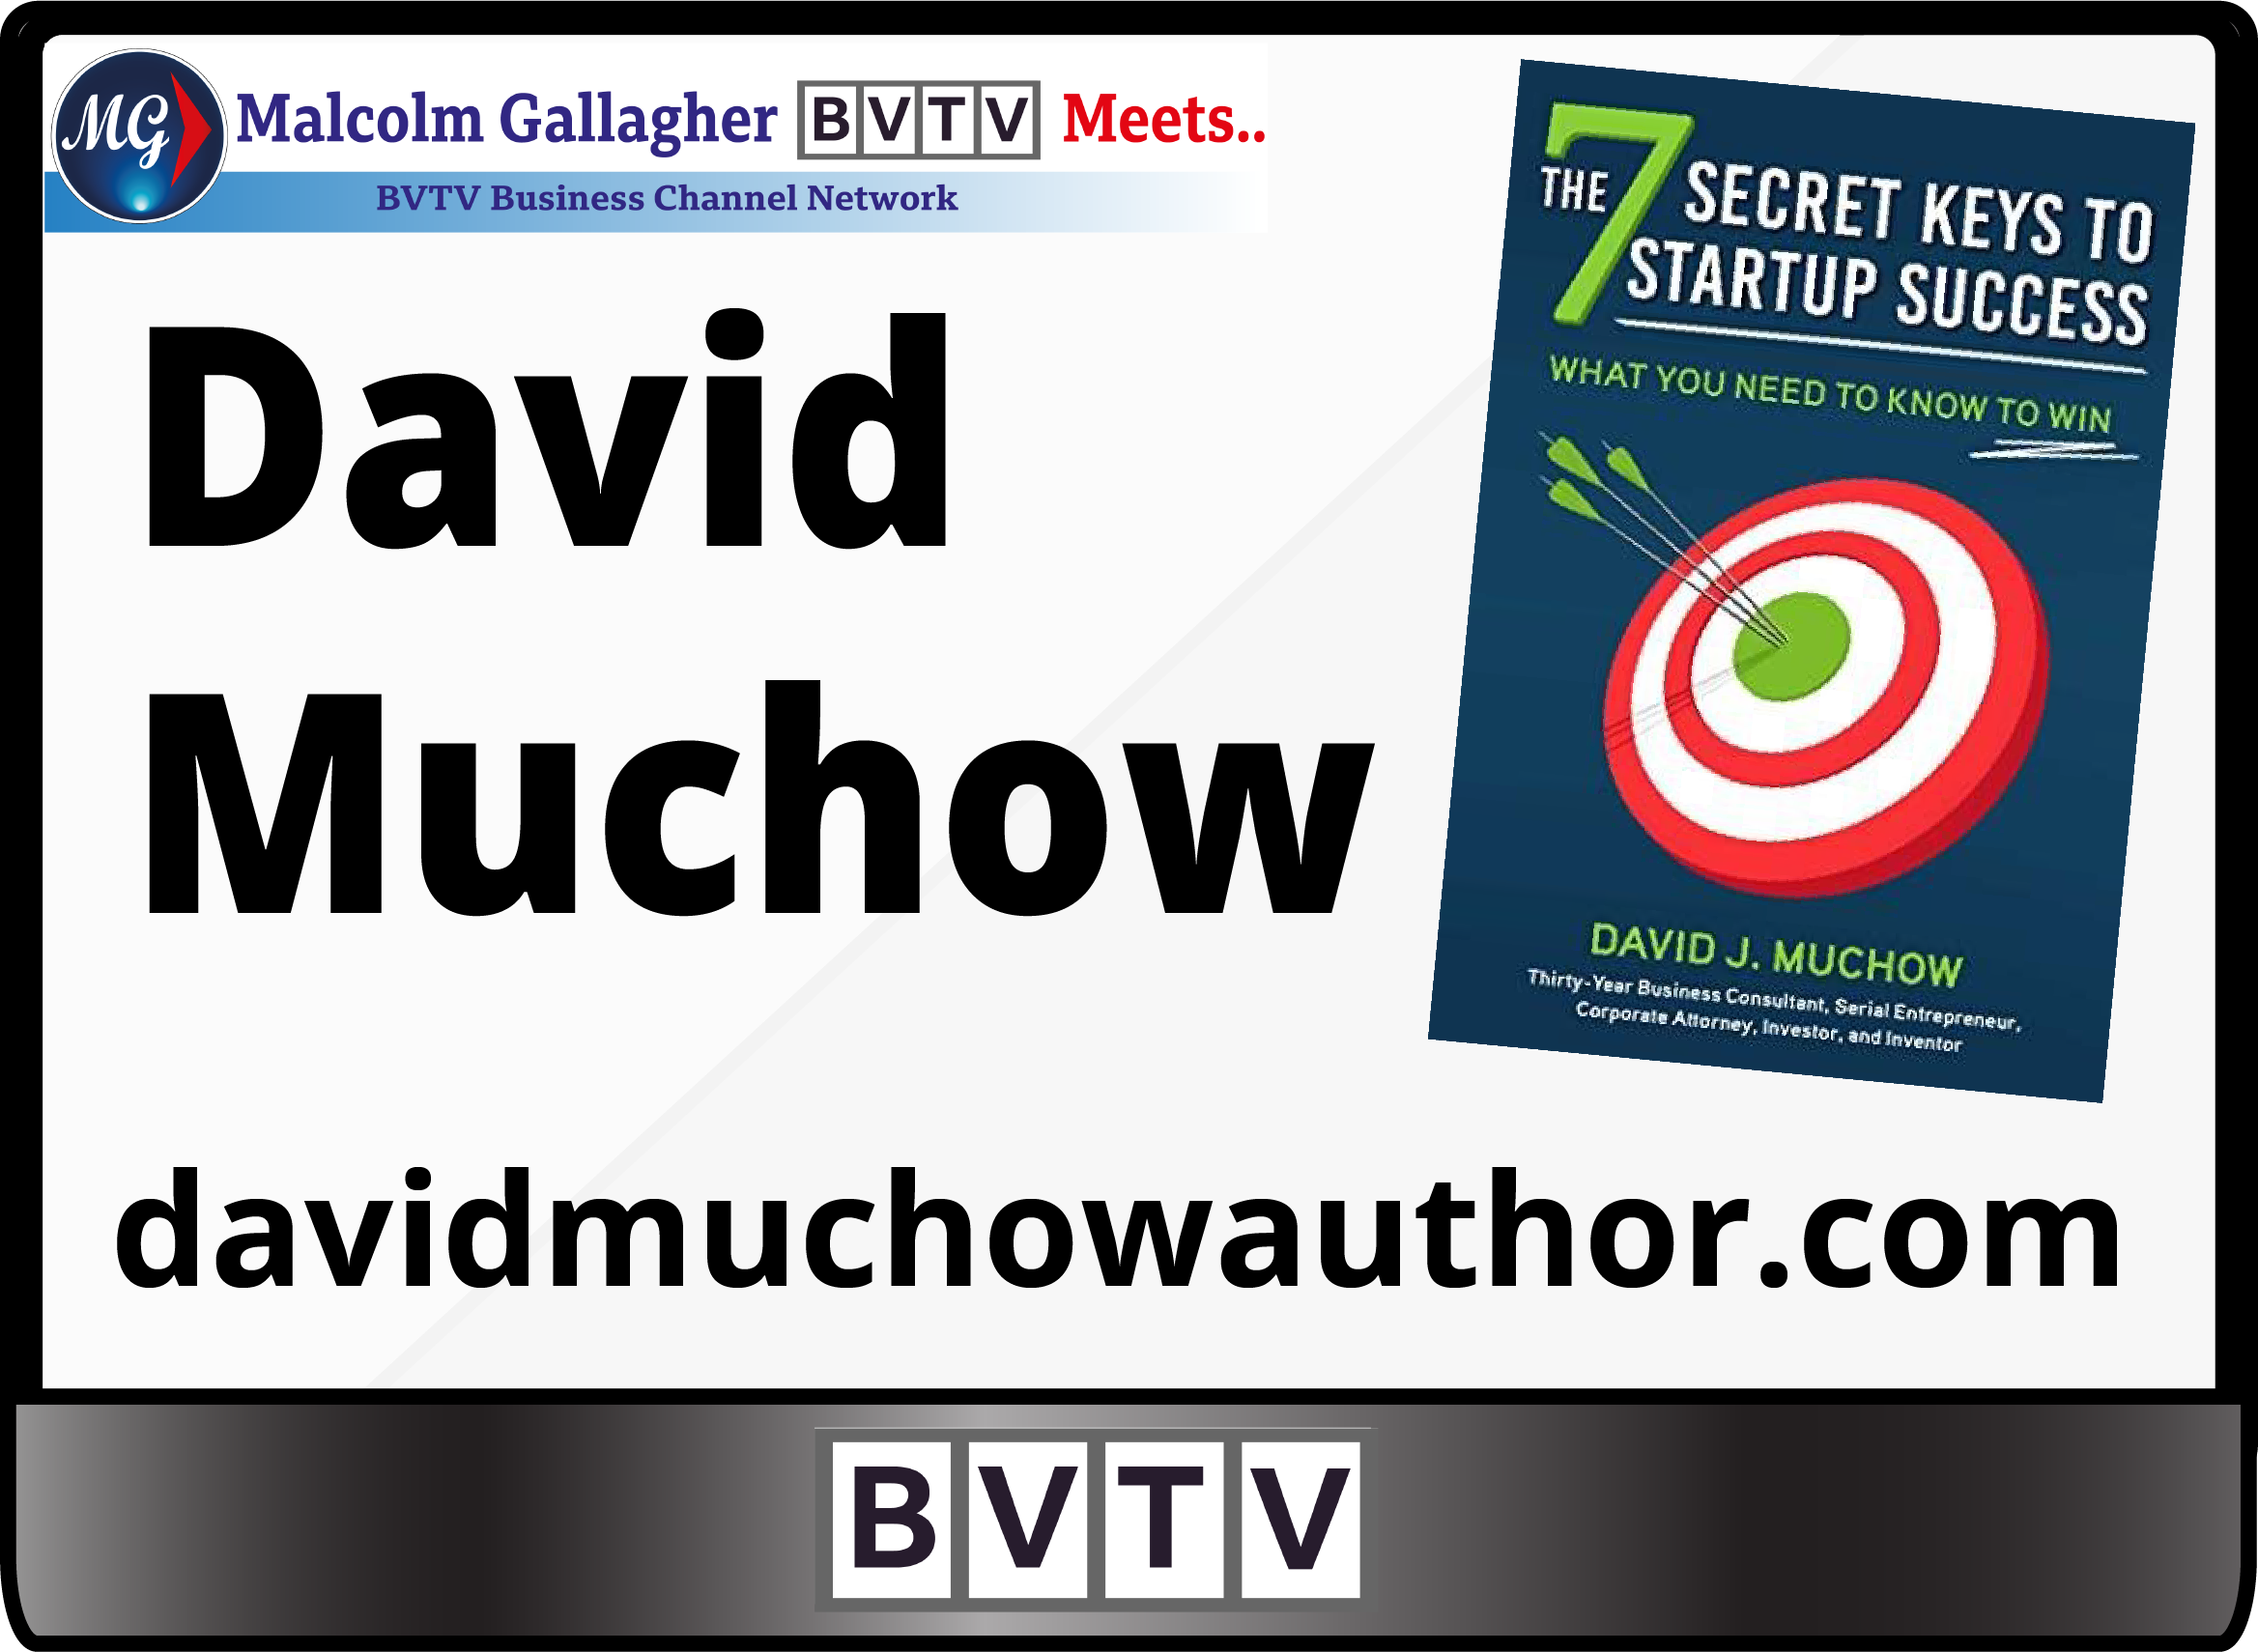 Author of “The 7 Secret Keys to Start-Up Success”, David Muchow, in BVTV Trilogy